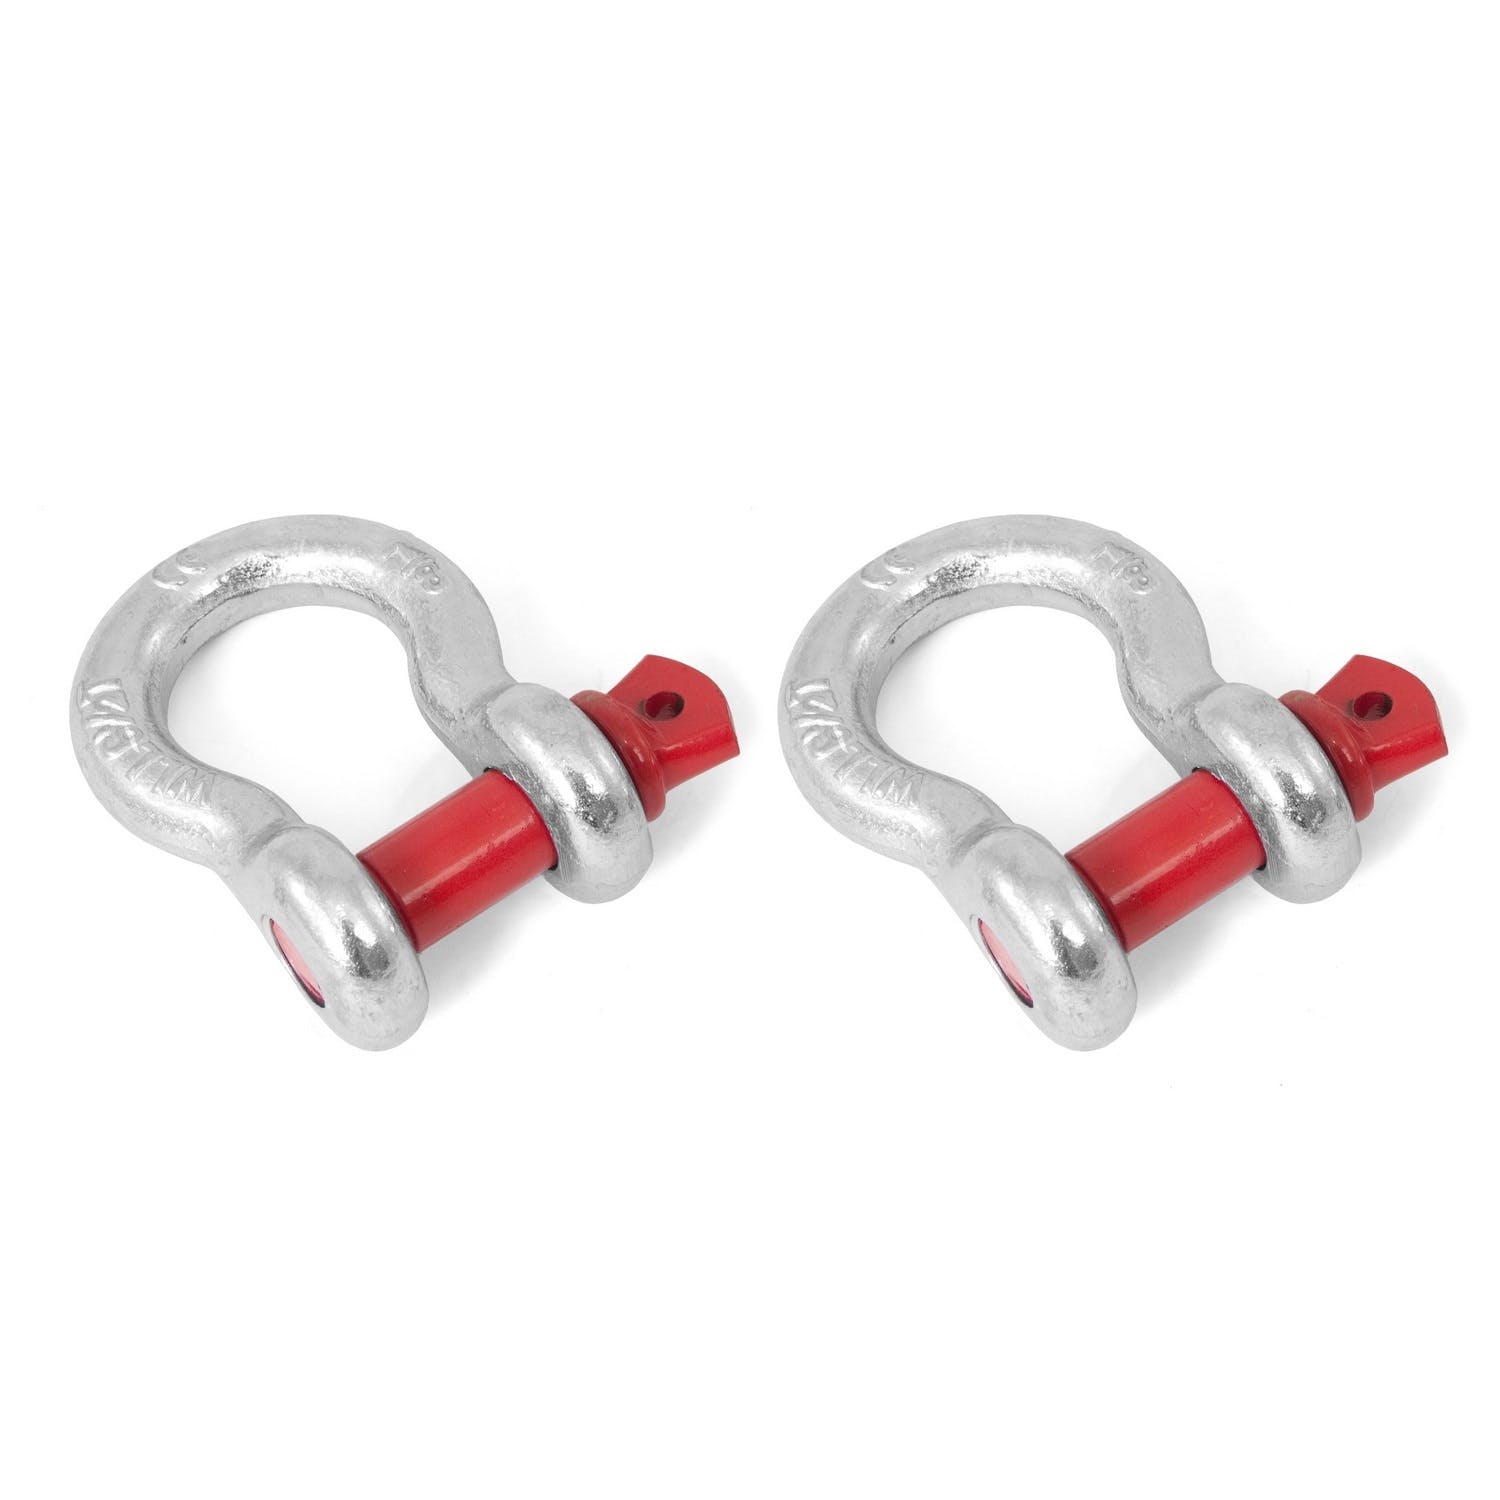 Rugged Ridge 11235.03 D-Ring Shackles; 7/8-Inch; Silver with Red pin; Steel; Pair